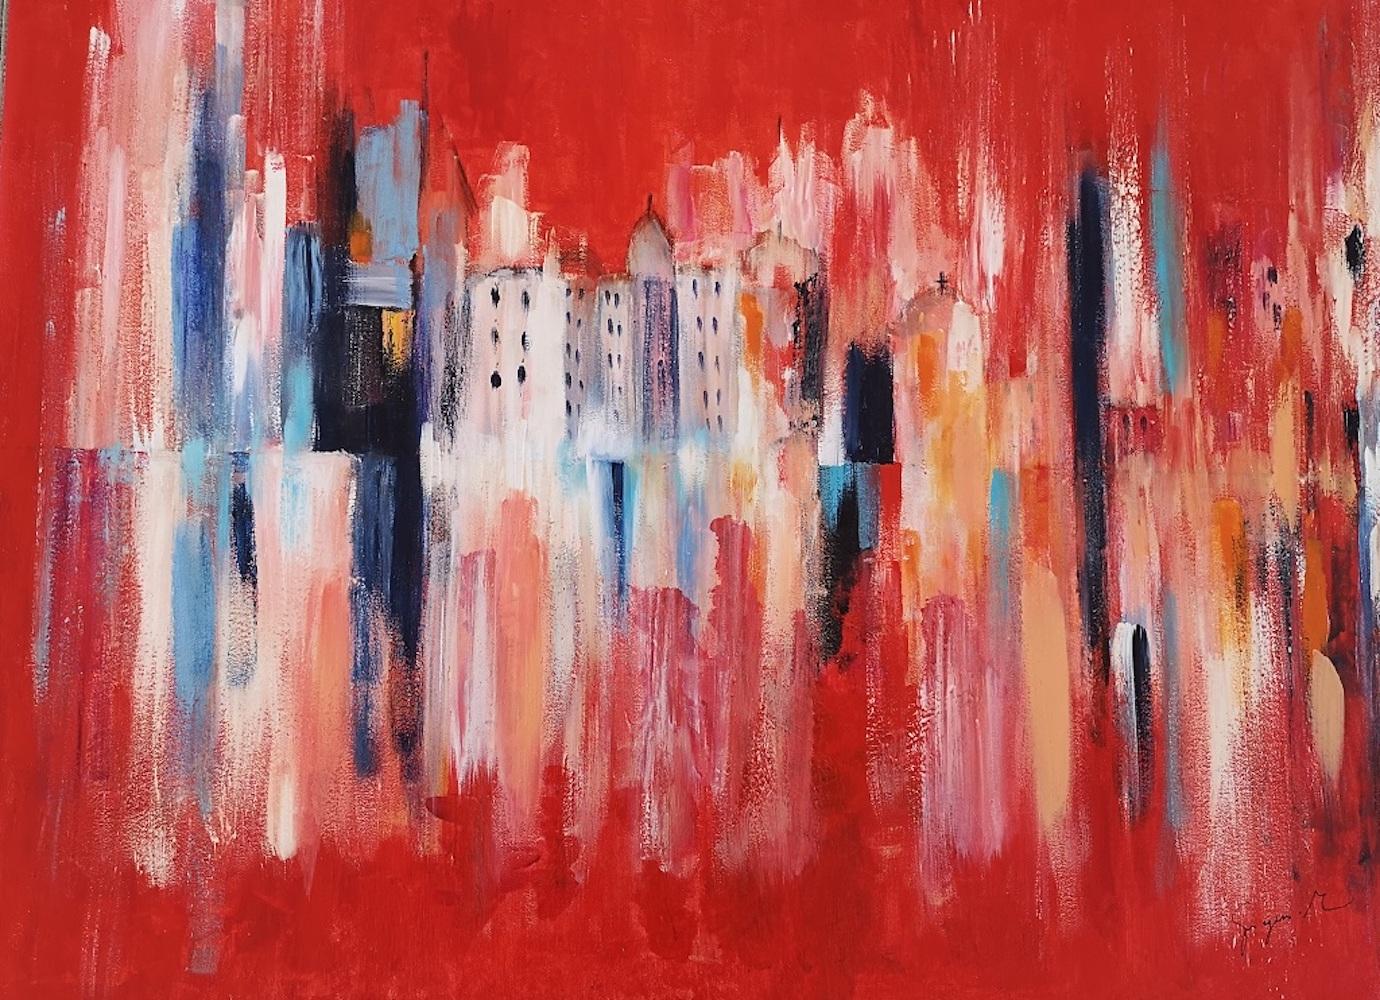 Red Landscape - Acrylic on Canvas by M. Goeyens - 2000s